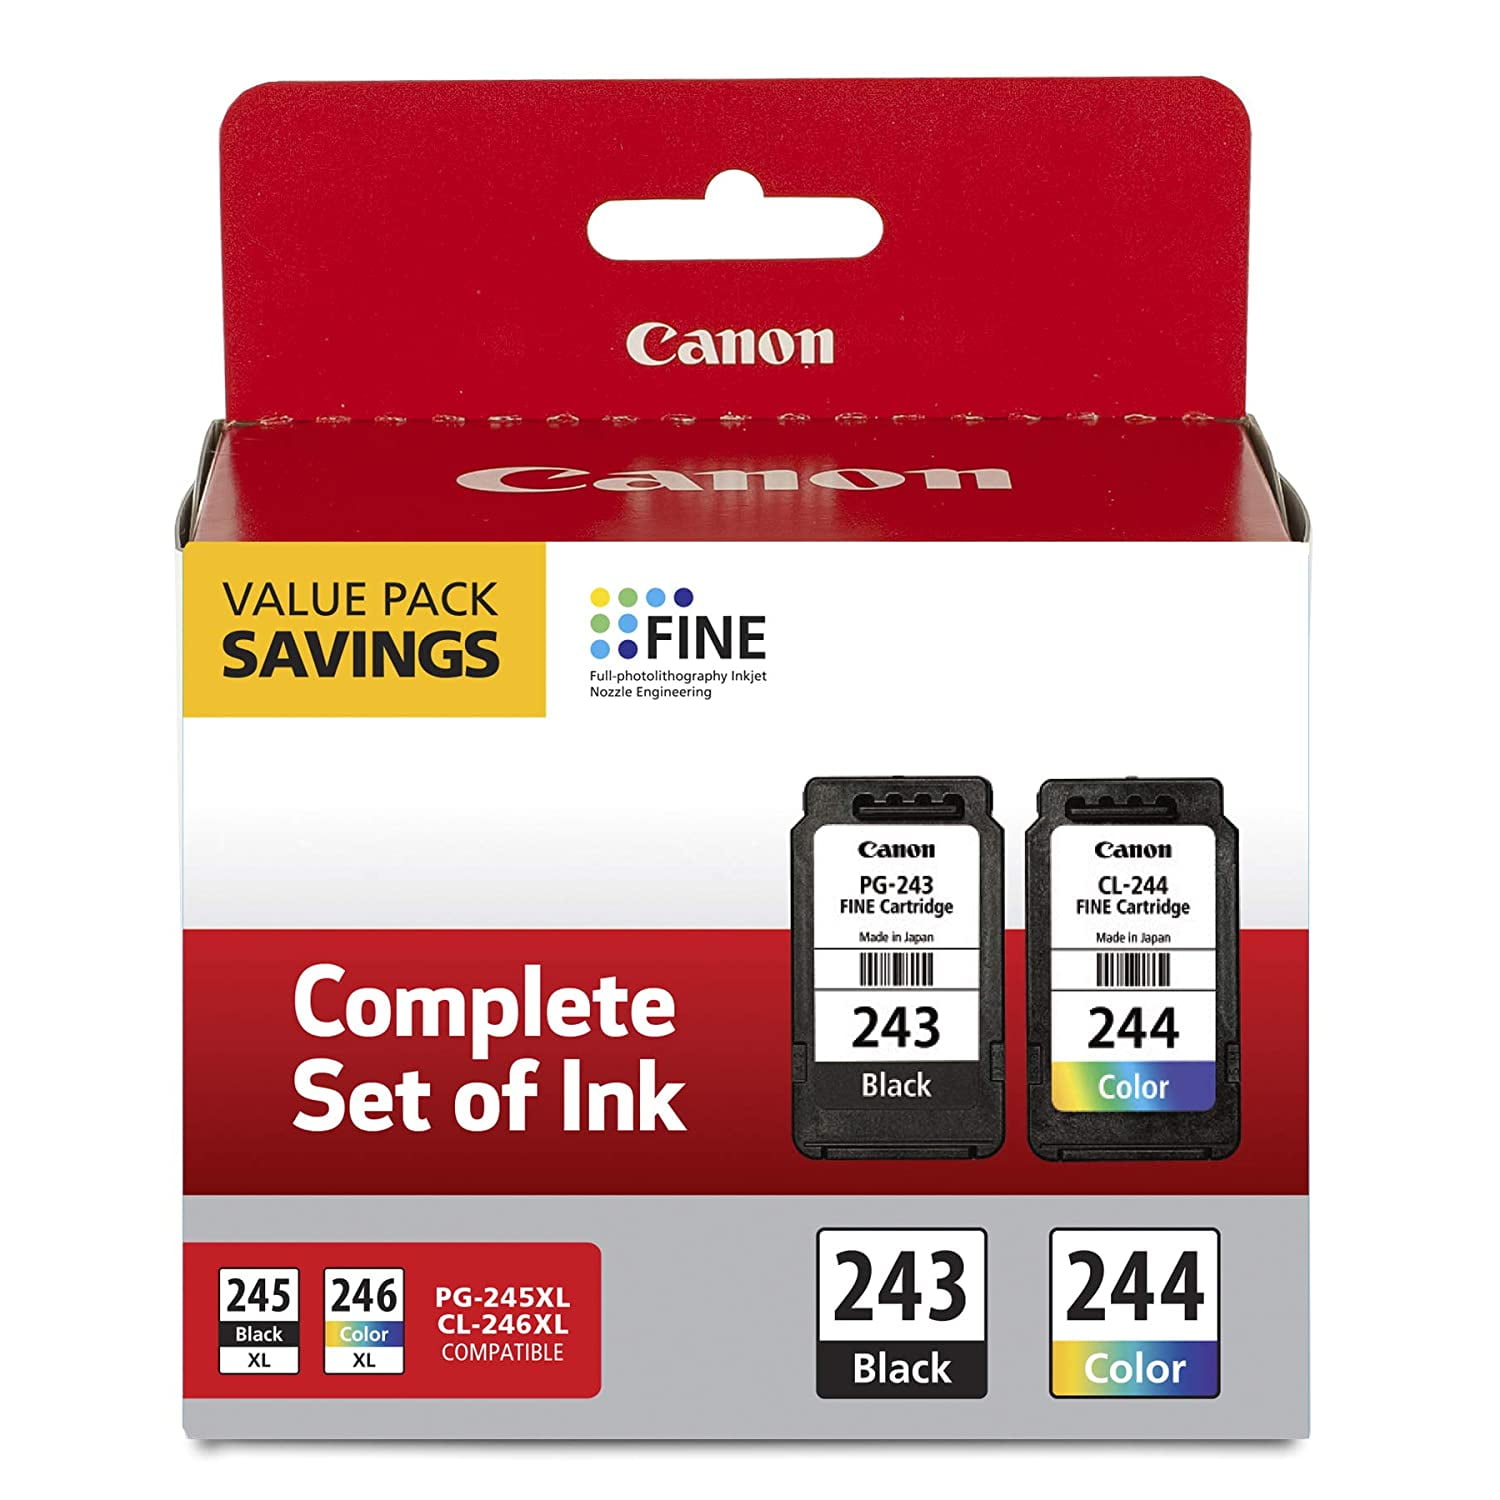 Canon PG-243/ CL-244 Ink Multi pack, Compatible to TR4520, MX492, MG2520,  MG2922, TS302 and TS202 Printers